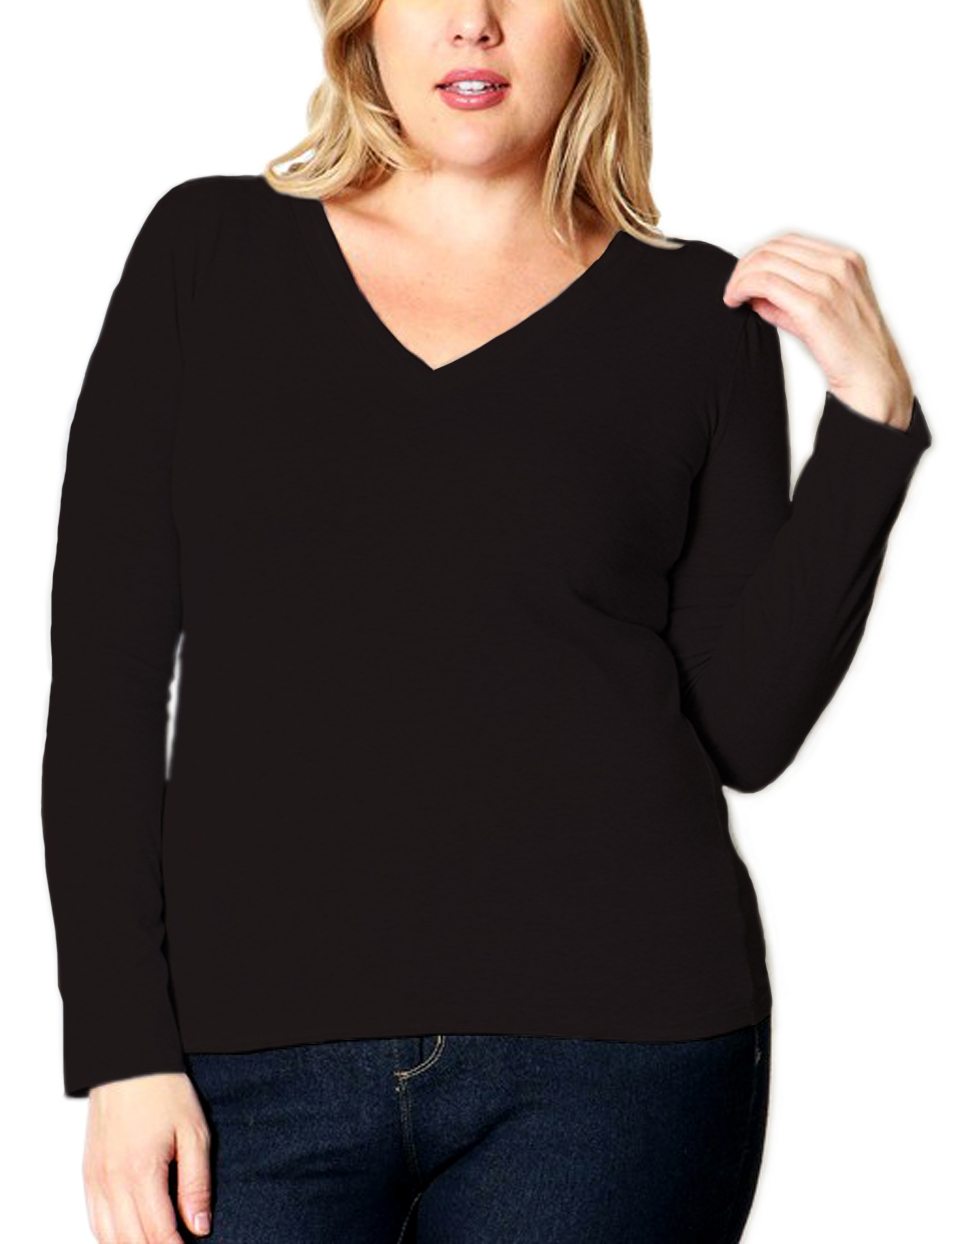 Belle Donne Plus Size T Shirt for Women V Neck Long Sleeves Casual Top - Black/X-Large